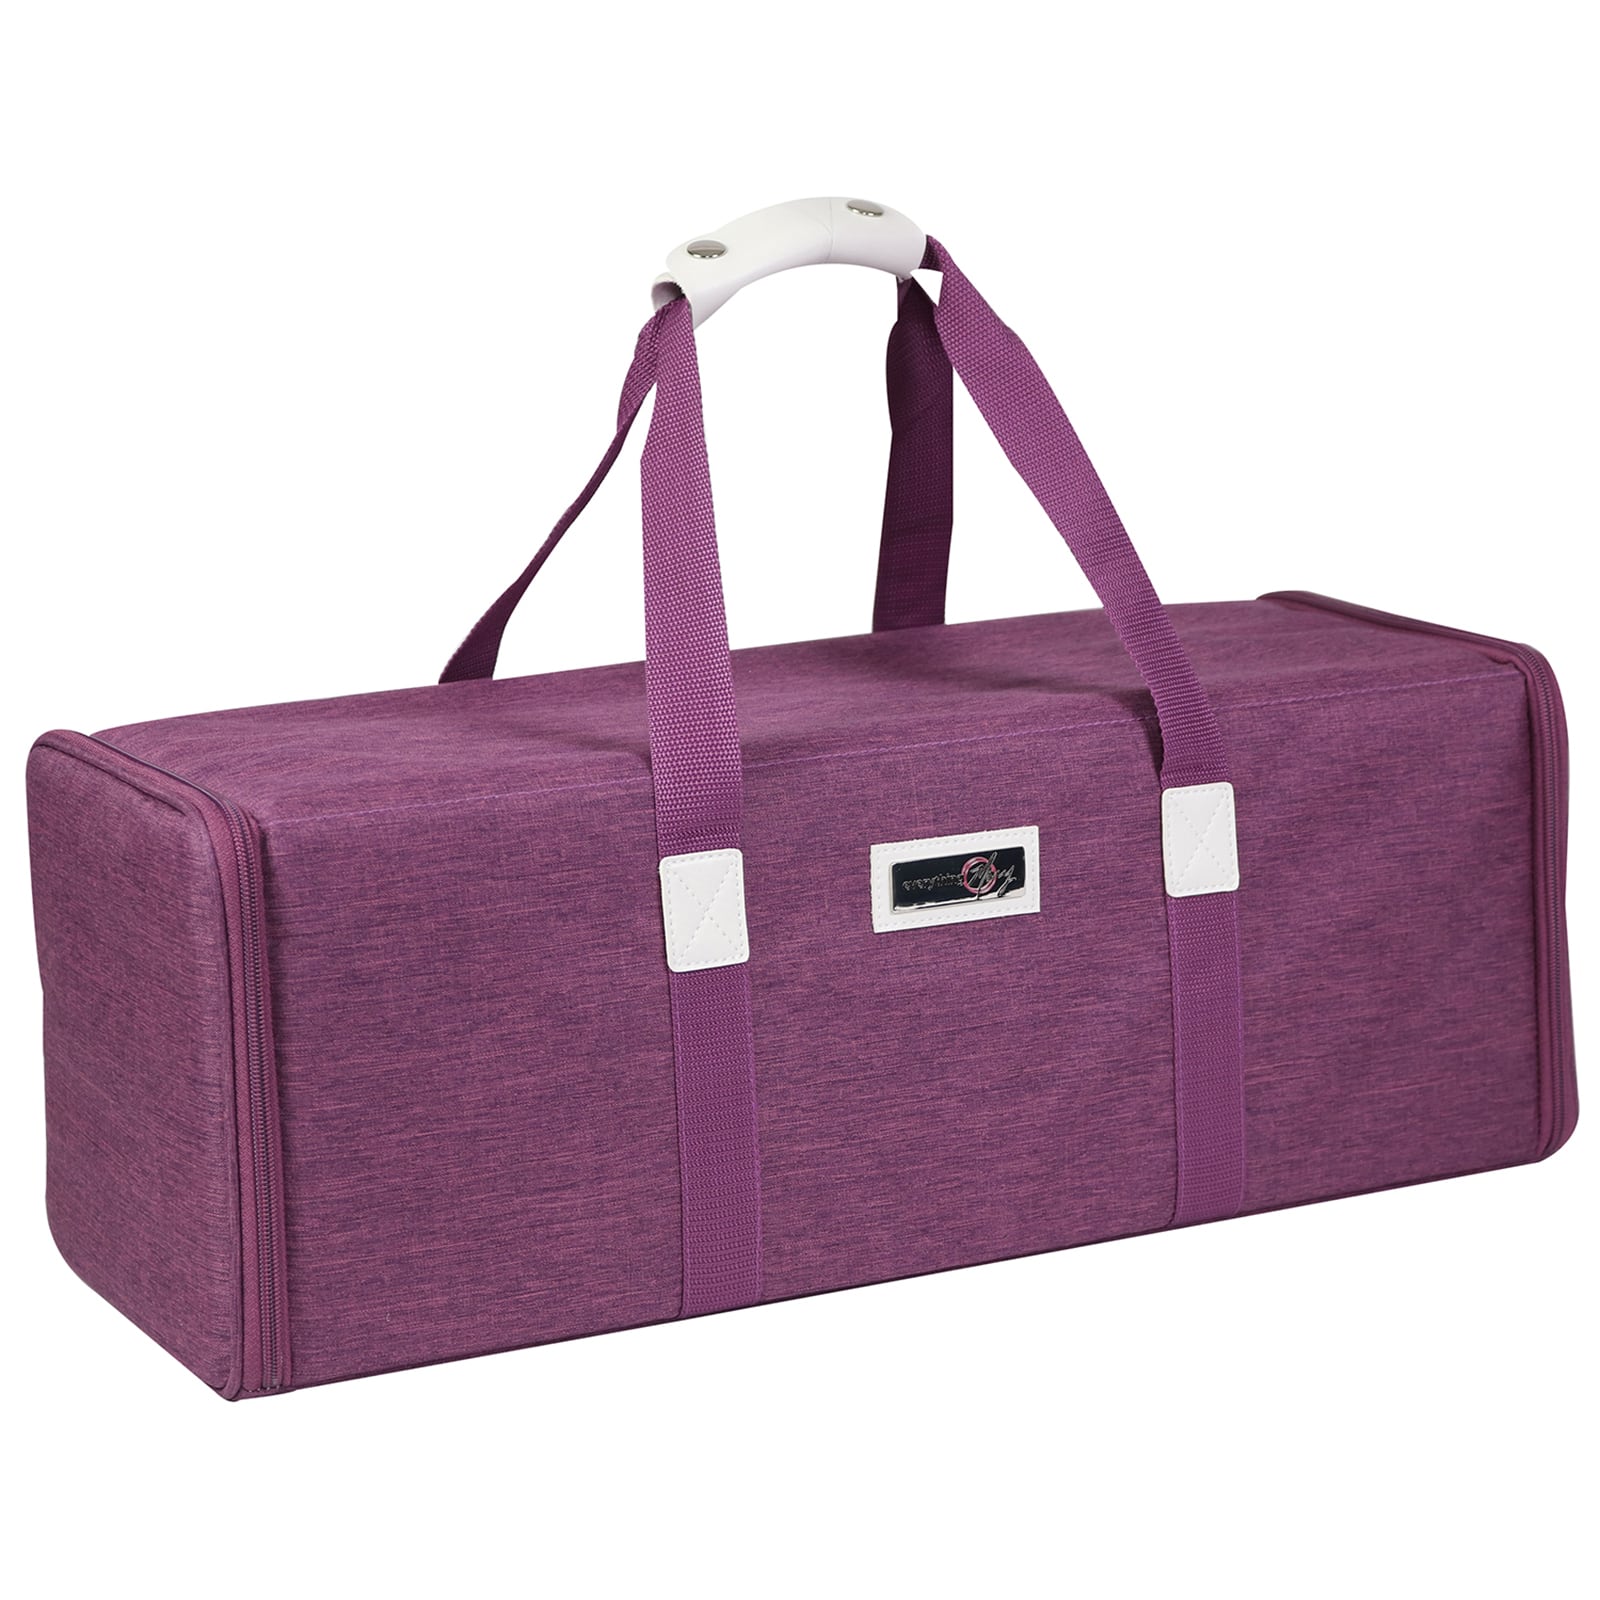 Everything Mary Die-Cut Machine Carrying Case, Heather Plum, Purple